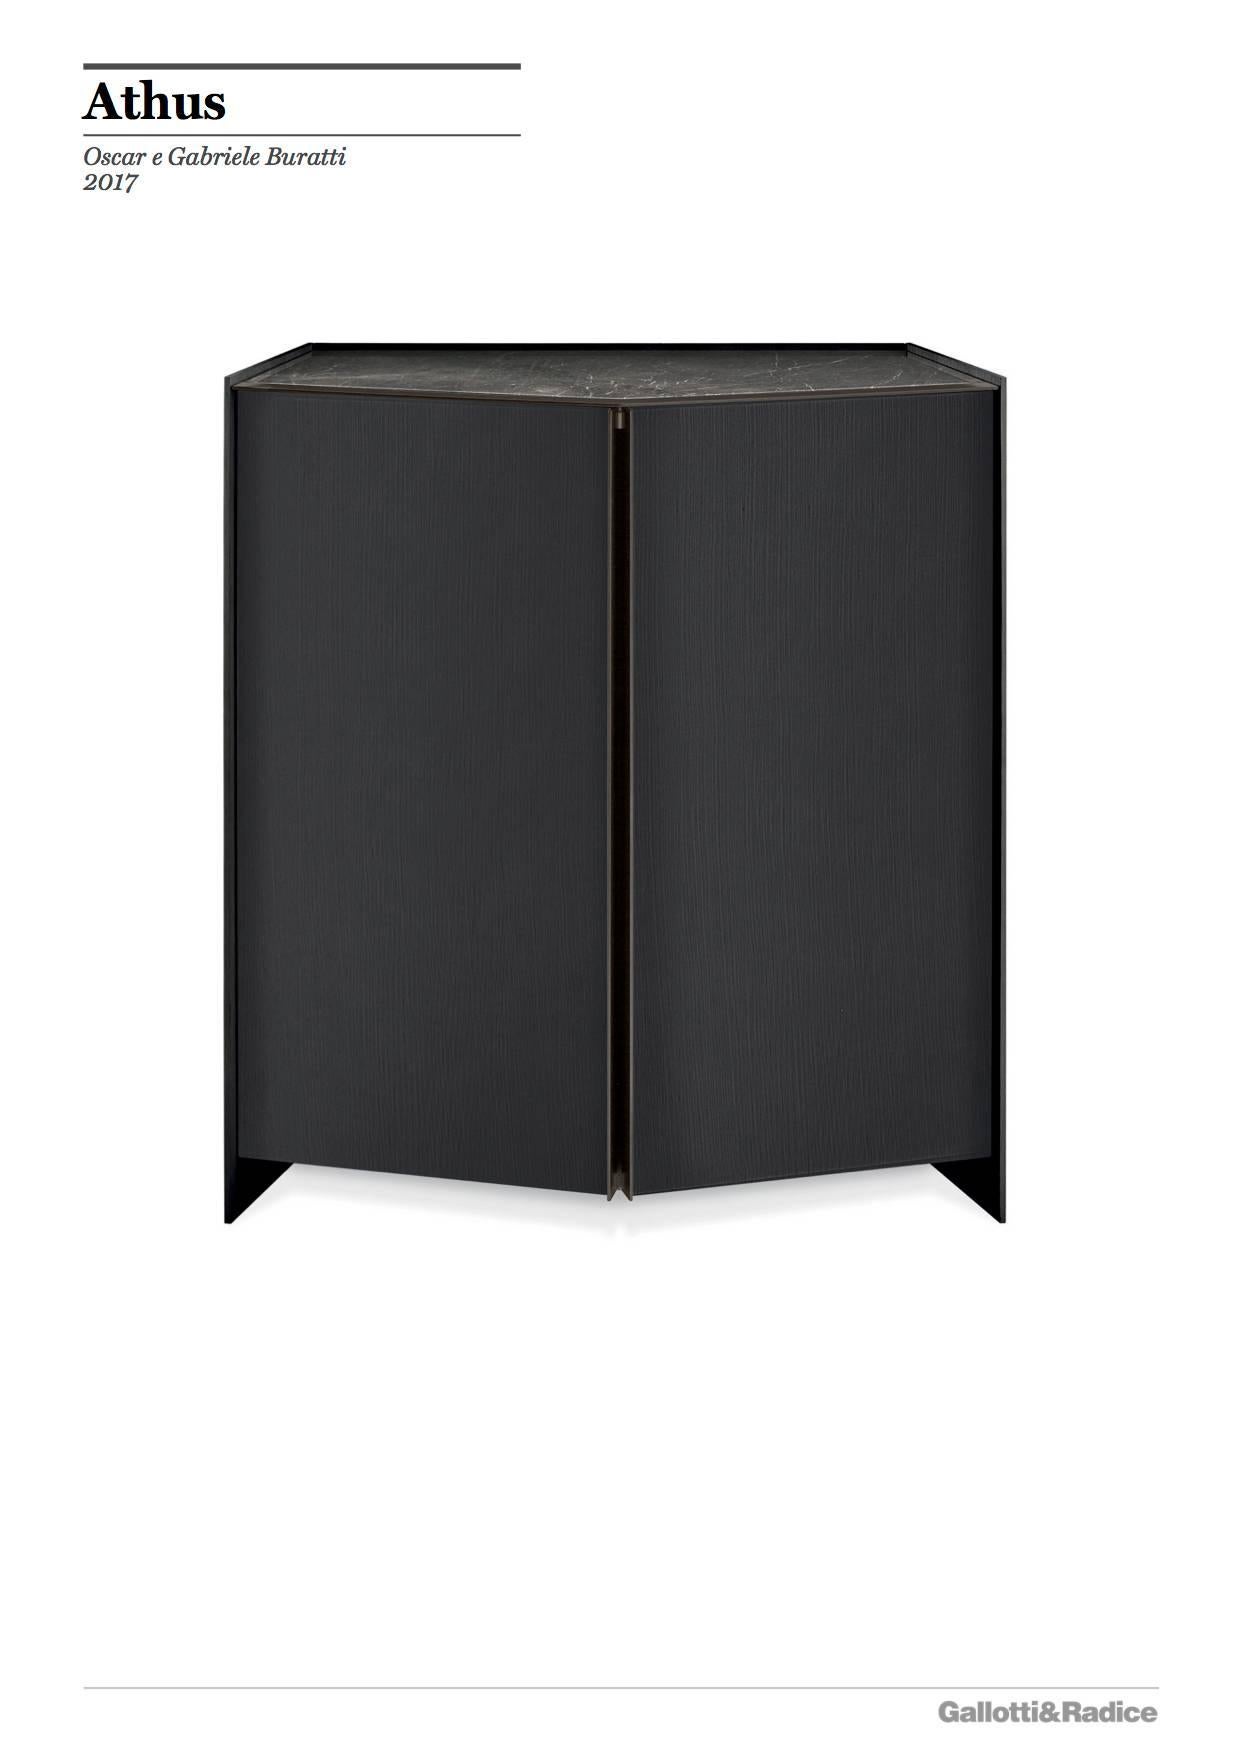 High cabinet in black open pore lacquered ash. Patinated bronze lacquered metal details. Grey stardust or Sahara noir marble top. Supplied with 10 mm tempered extra light glass shelf and mirrored inside back.
Size:
125 W x 55 D x 136 H